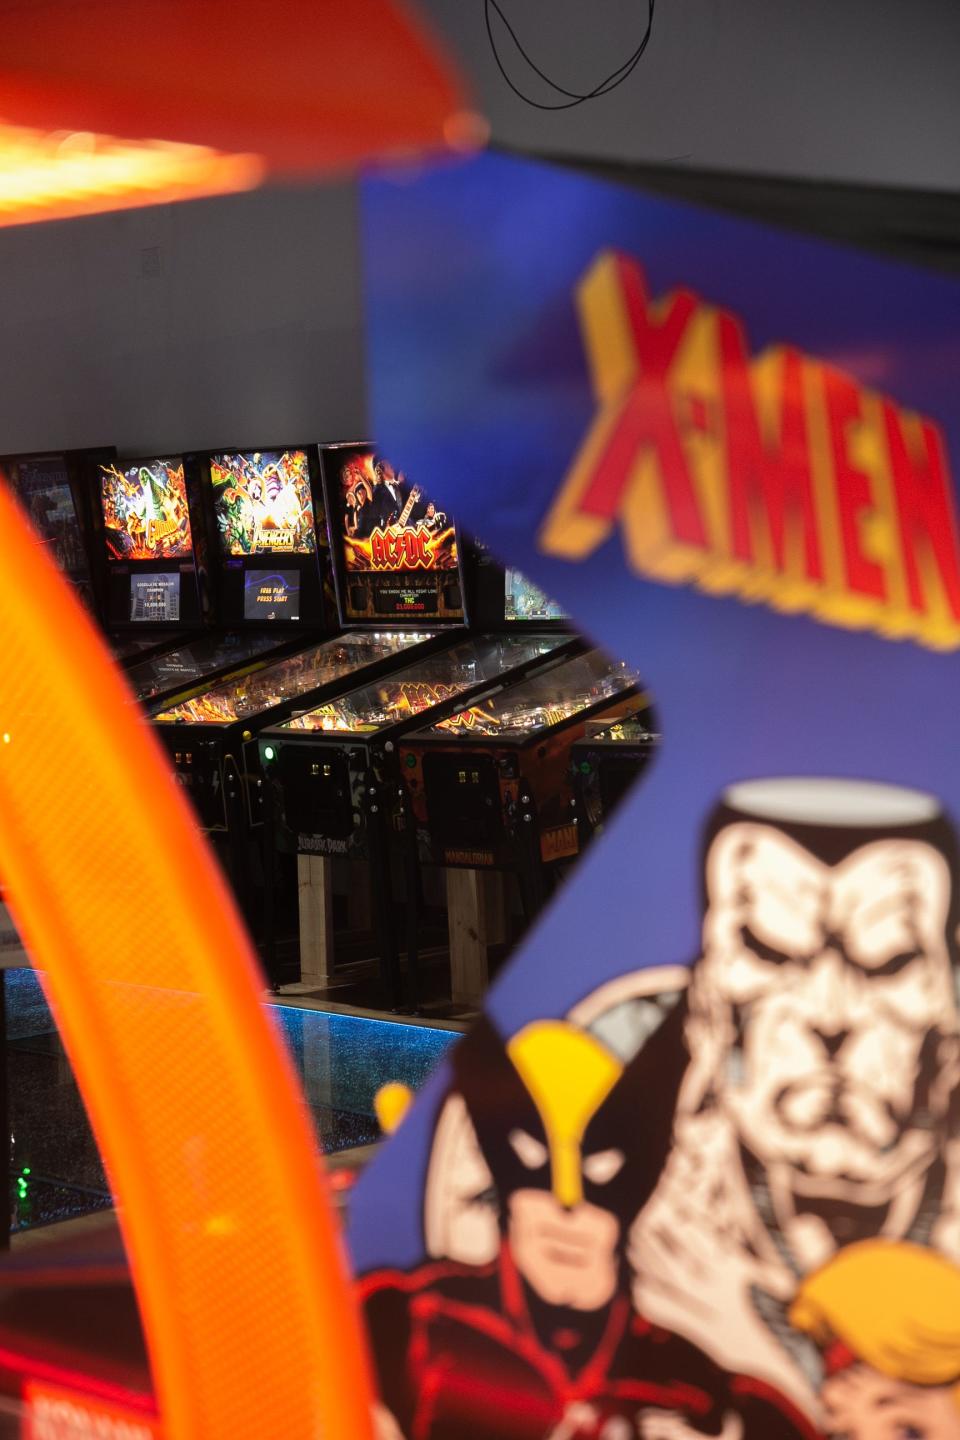 Pinball machines, air hockey and other arcade games are found inside Retro on Saturday, May 27, 2023.